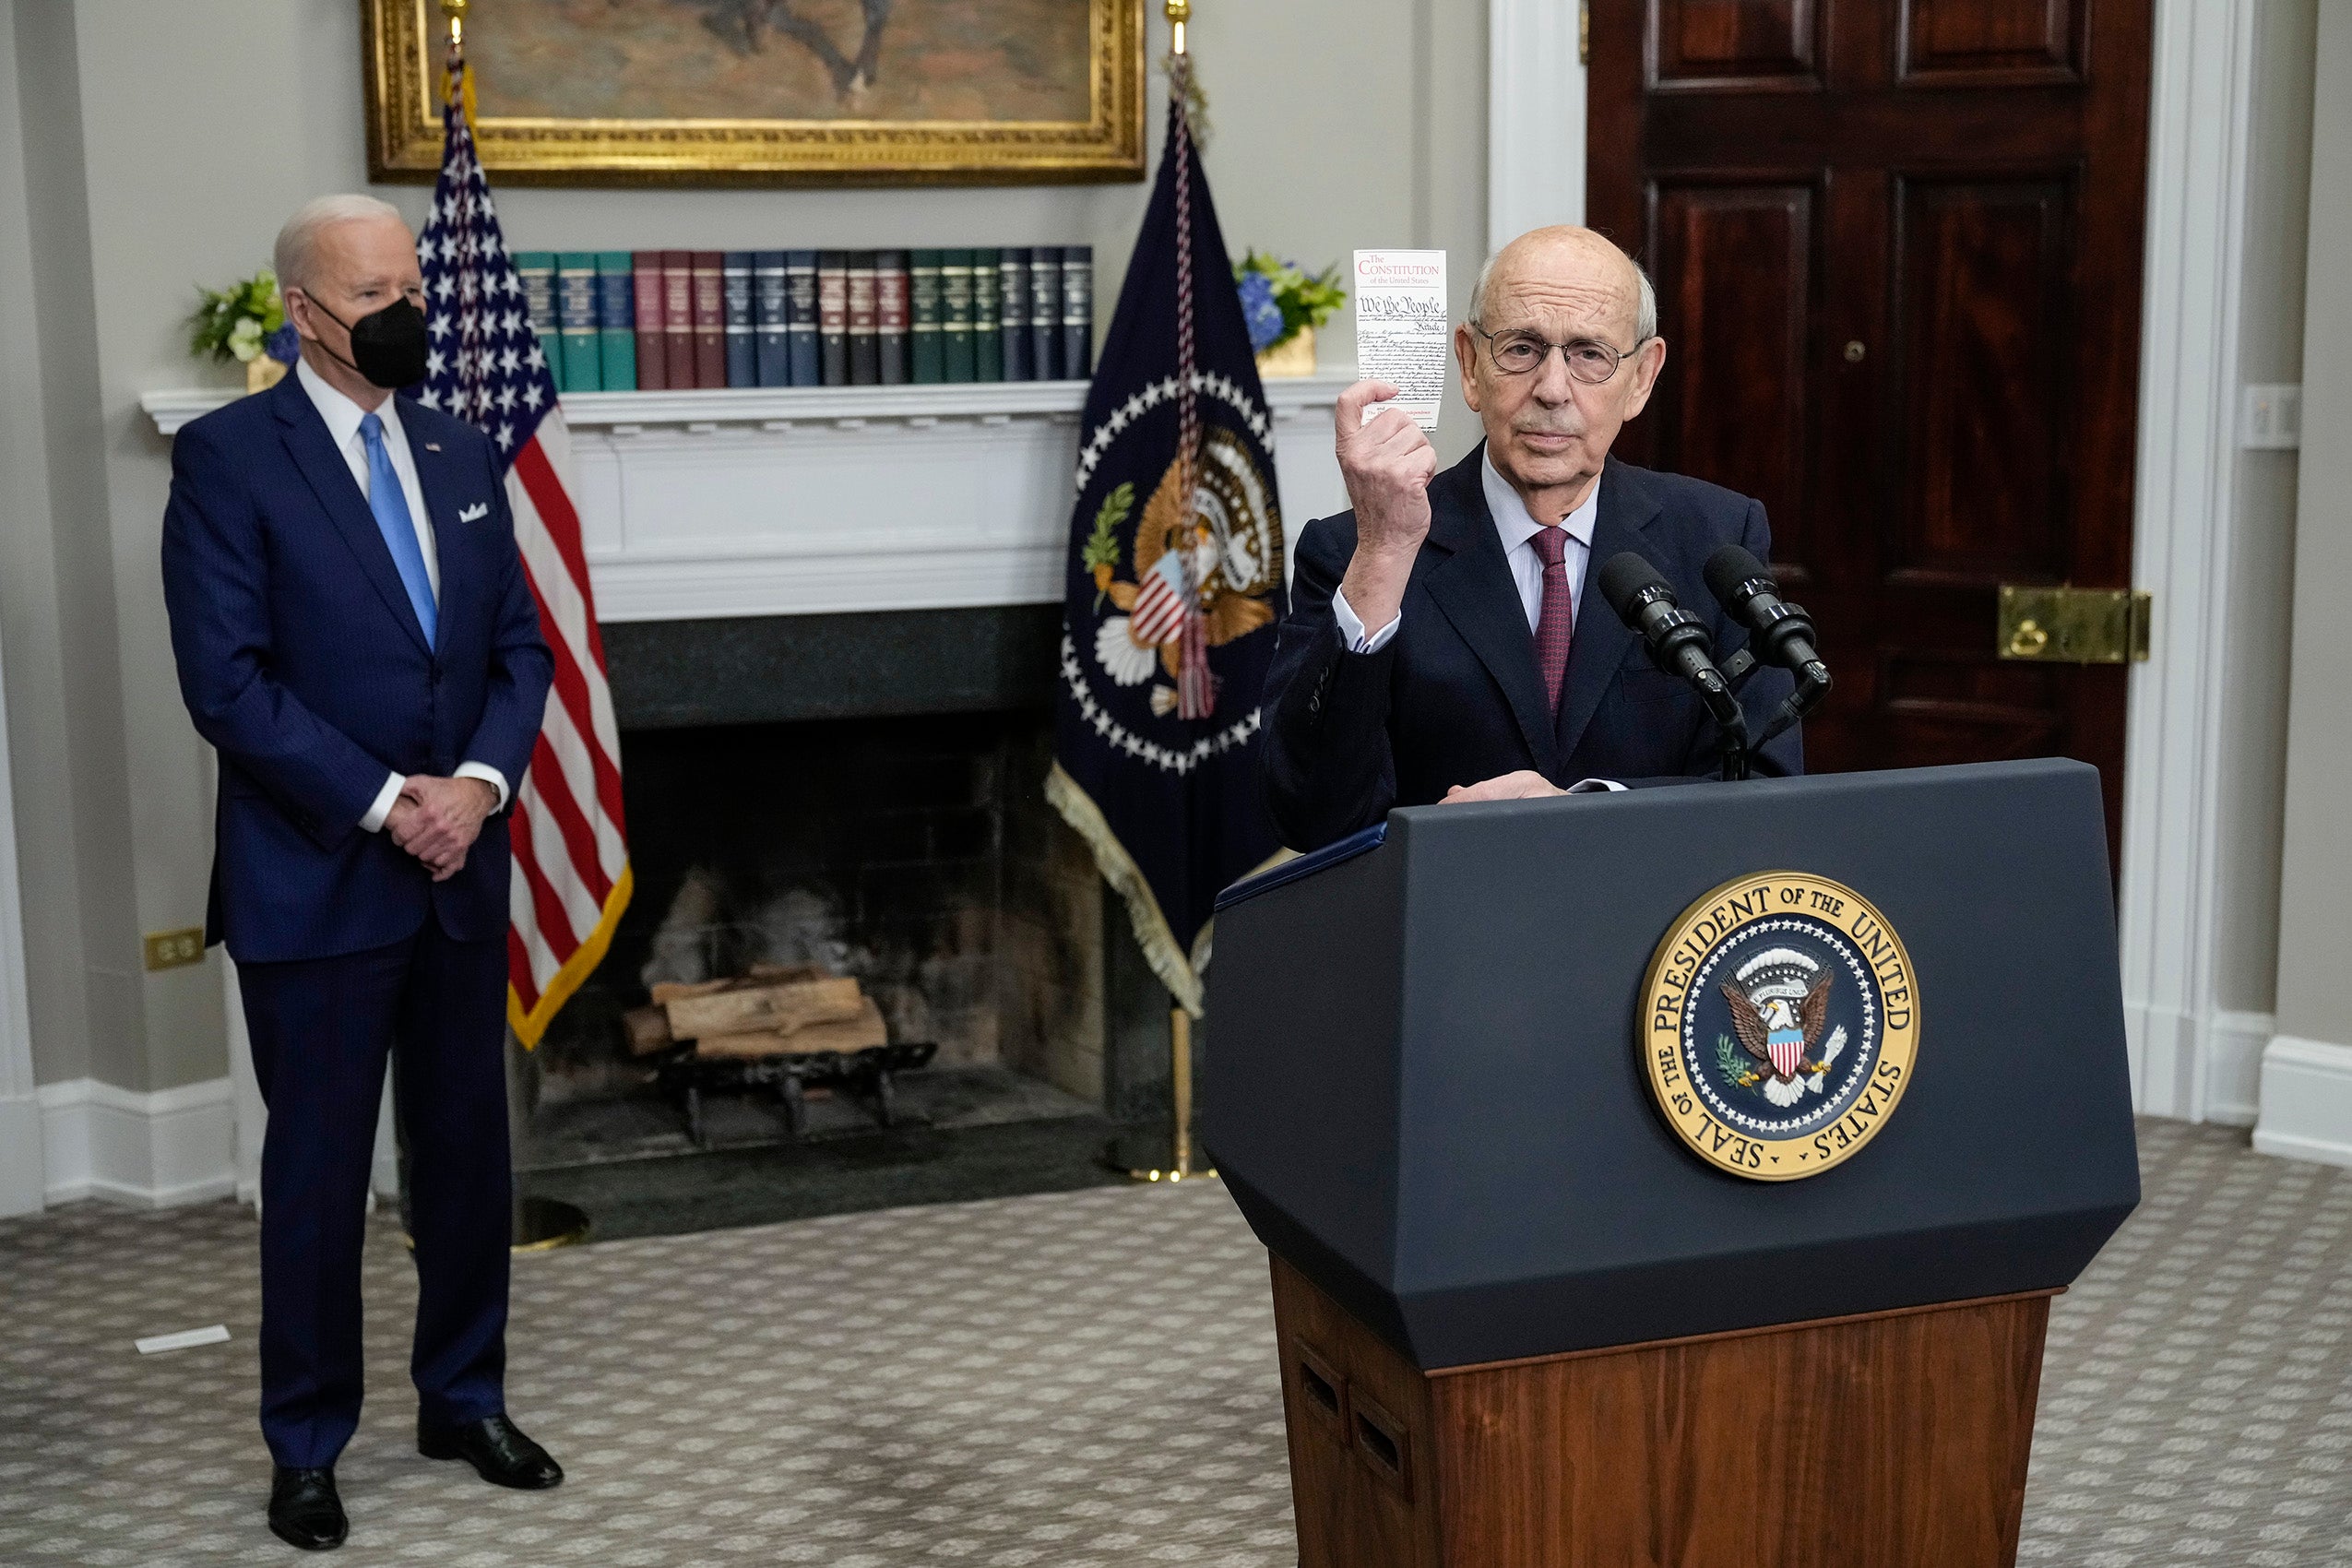 Supreme Court Justice Stephen Breyer Announces His Retirement At The White House